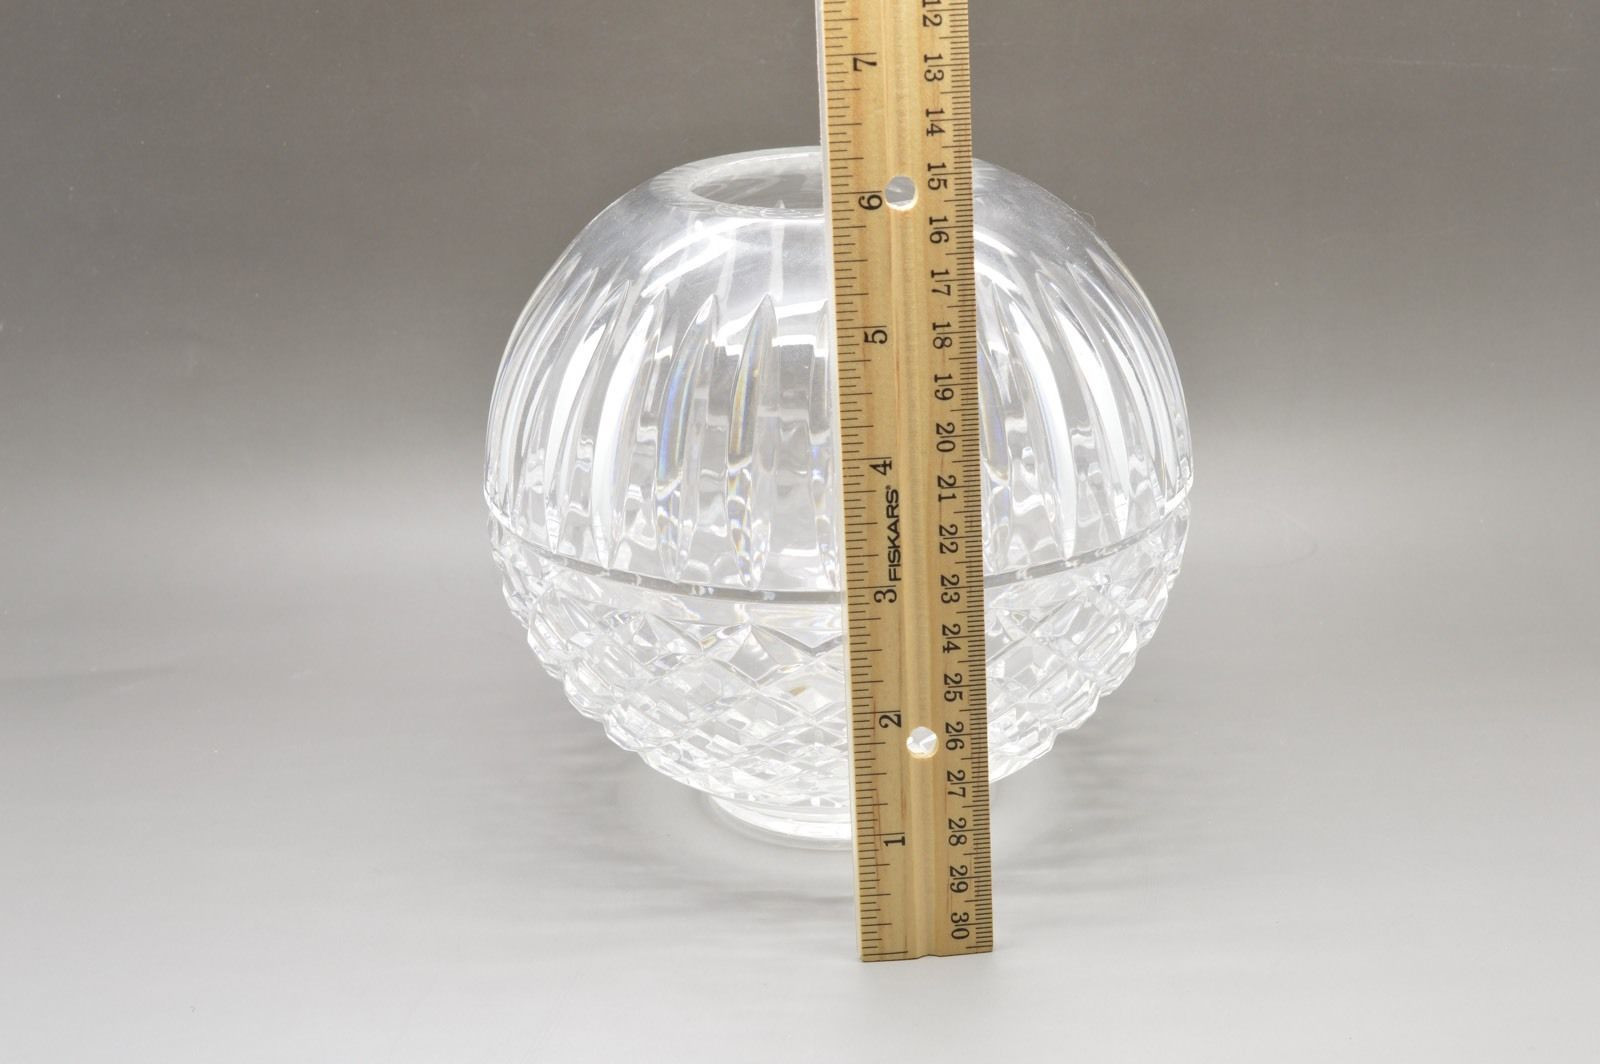 24 attractive Waterford Rose Bowl Vase 2024 free download waterford rose bowl vase of waterford crystal maeve or tramore rose bowl large 5 3 4 ireland regarding waterford crystal maeve or tramore rose bowl large 5 3 4 ireland made 2 of 8 waterford 